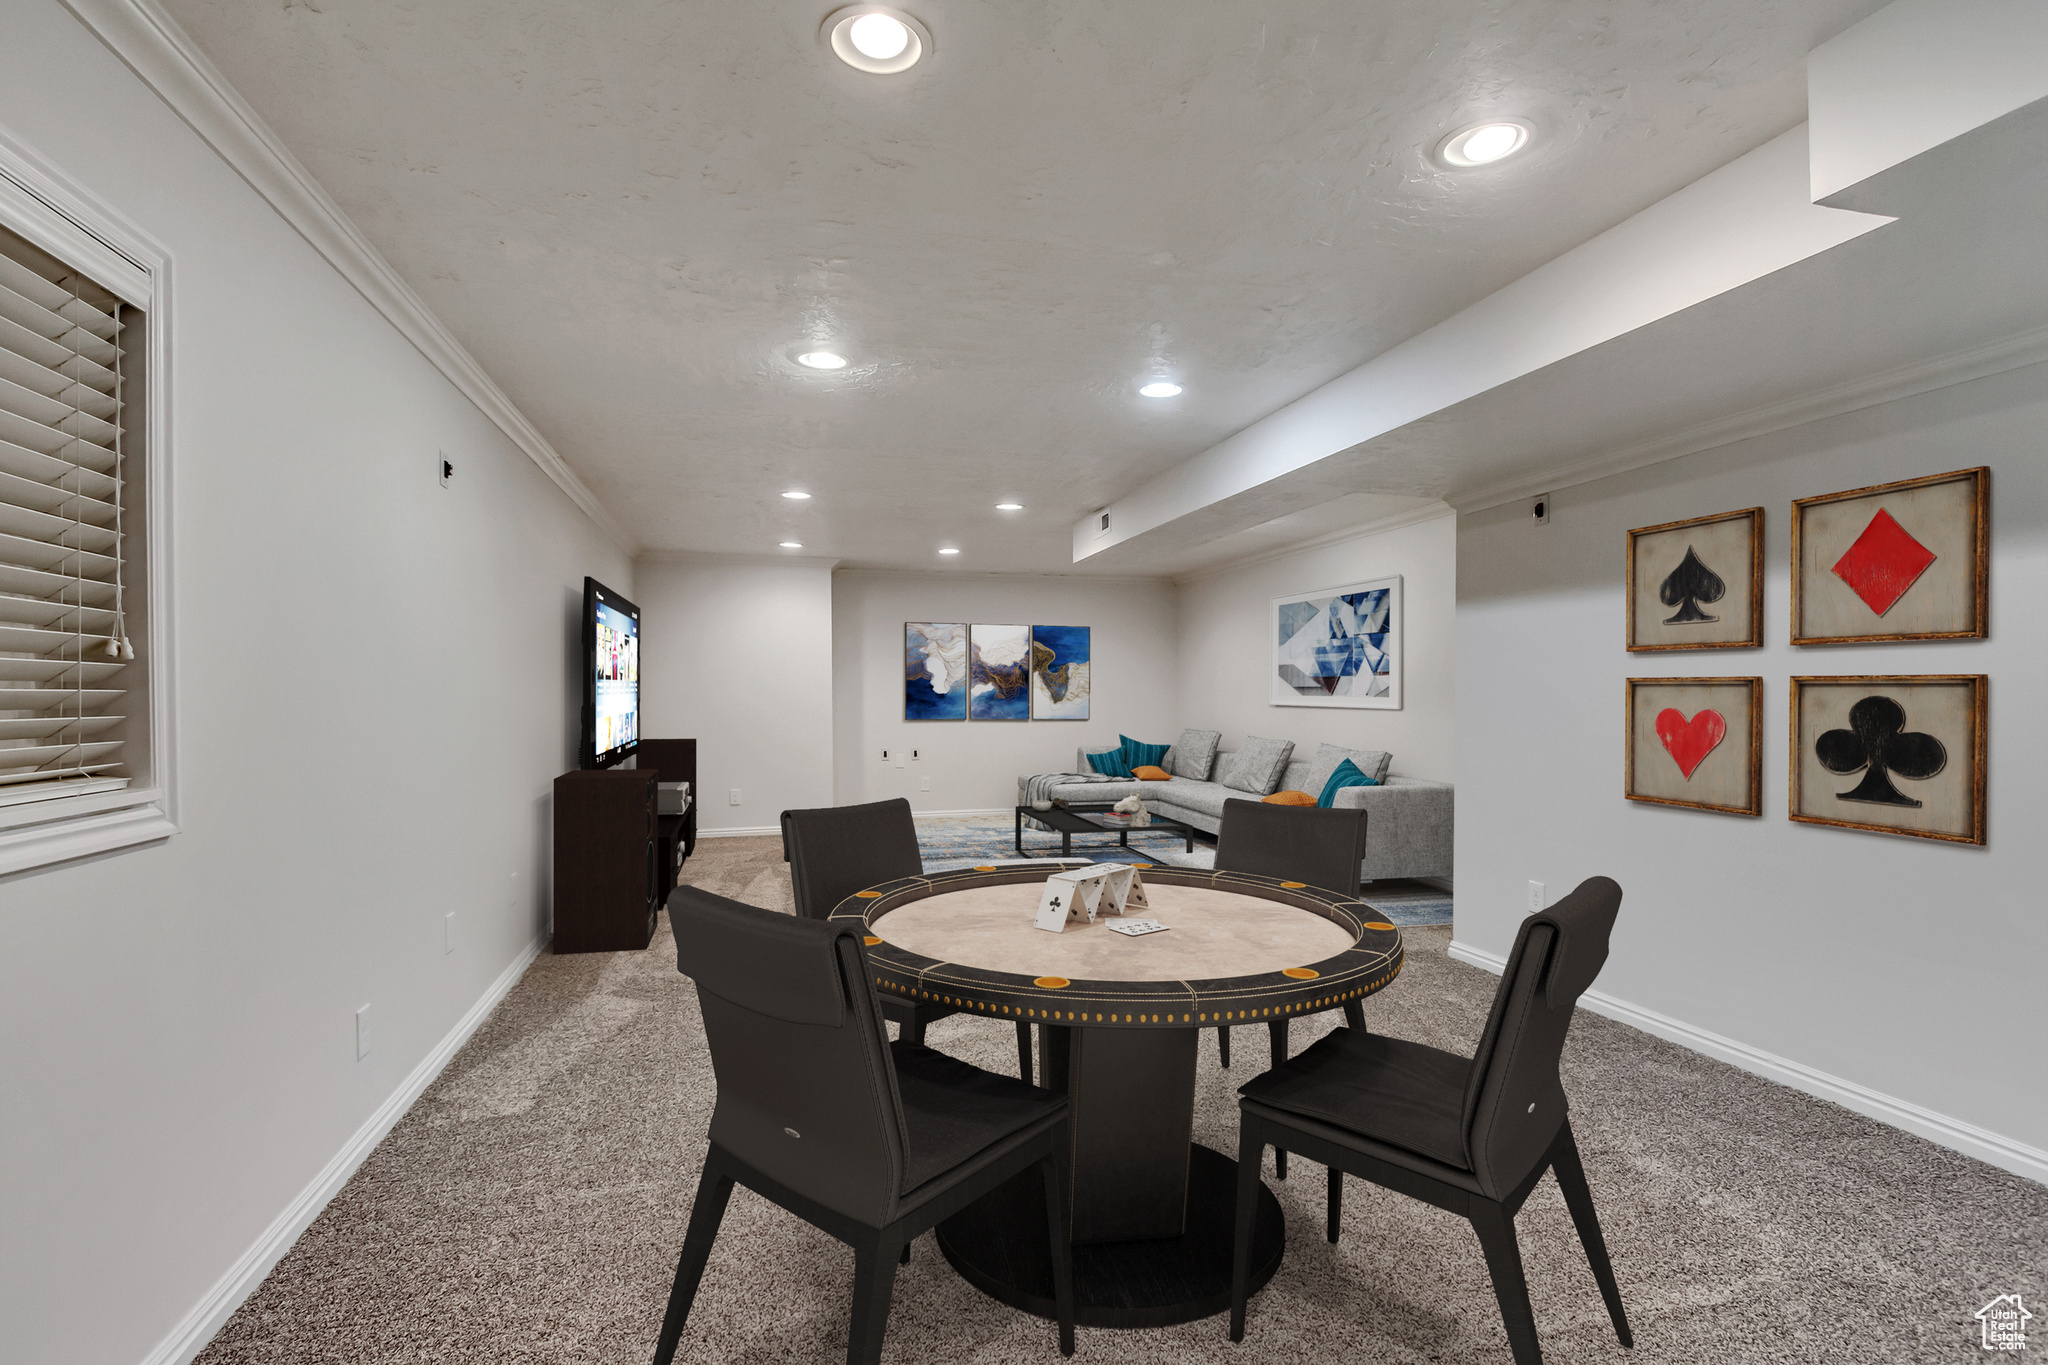 Basement Family Room has been virtually staged.